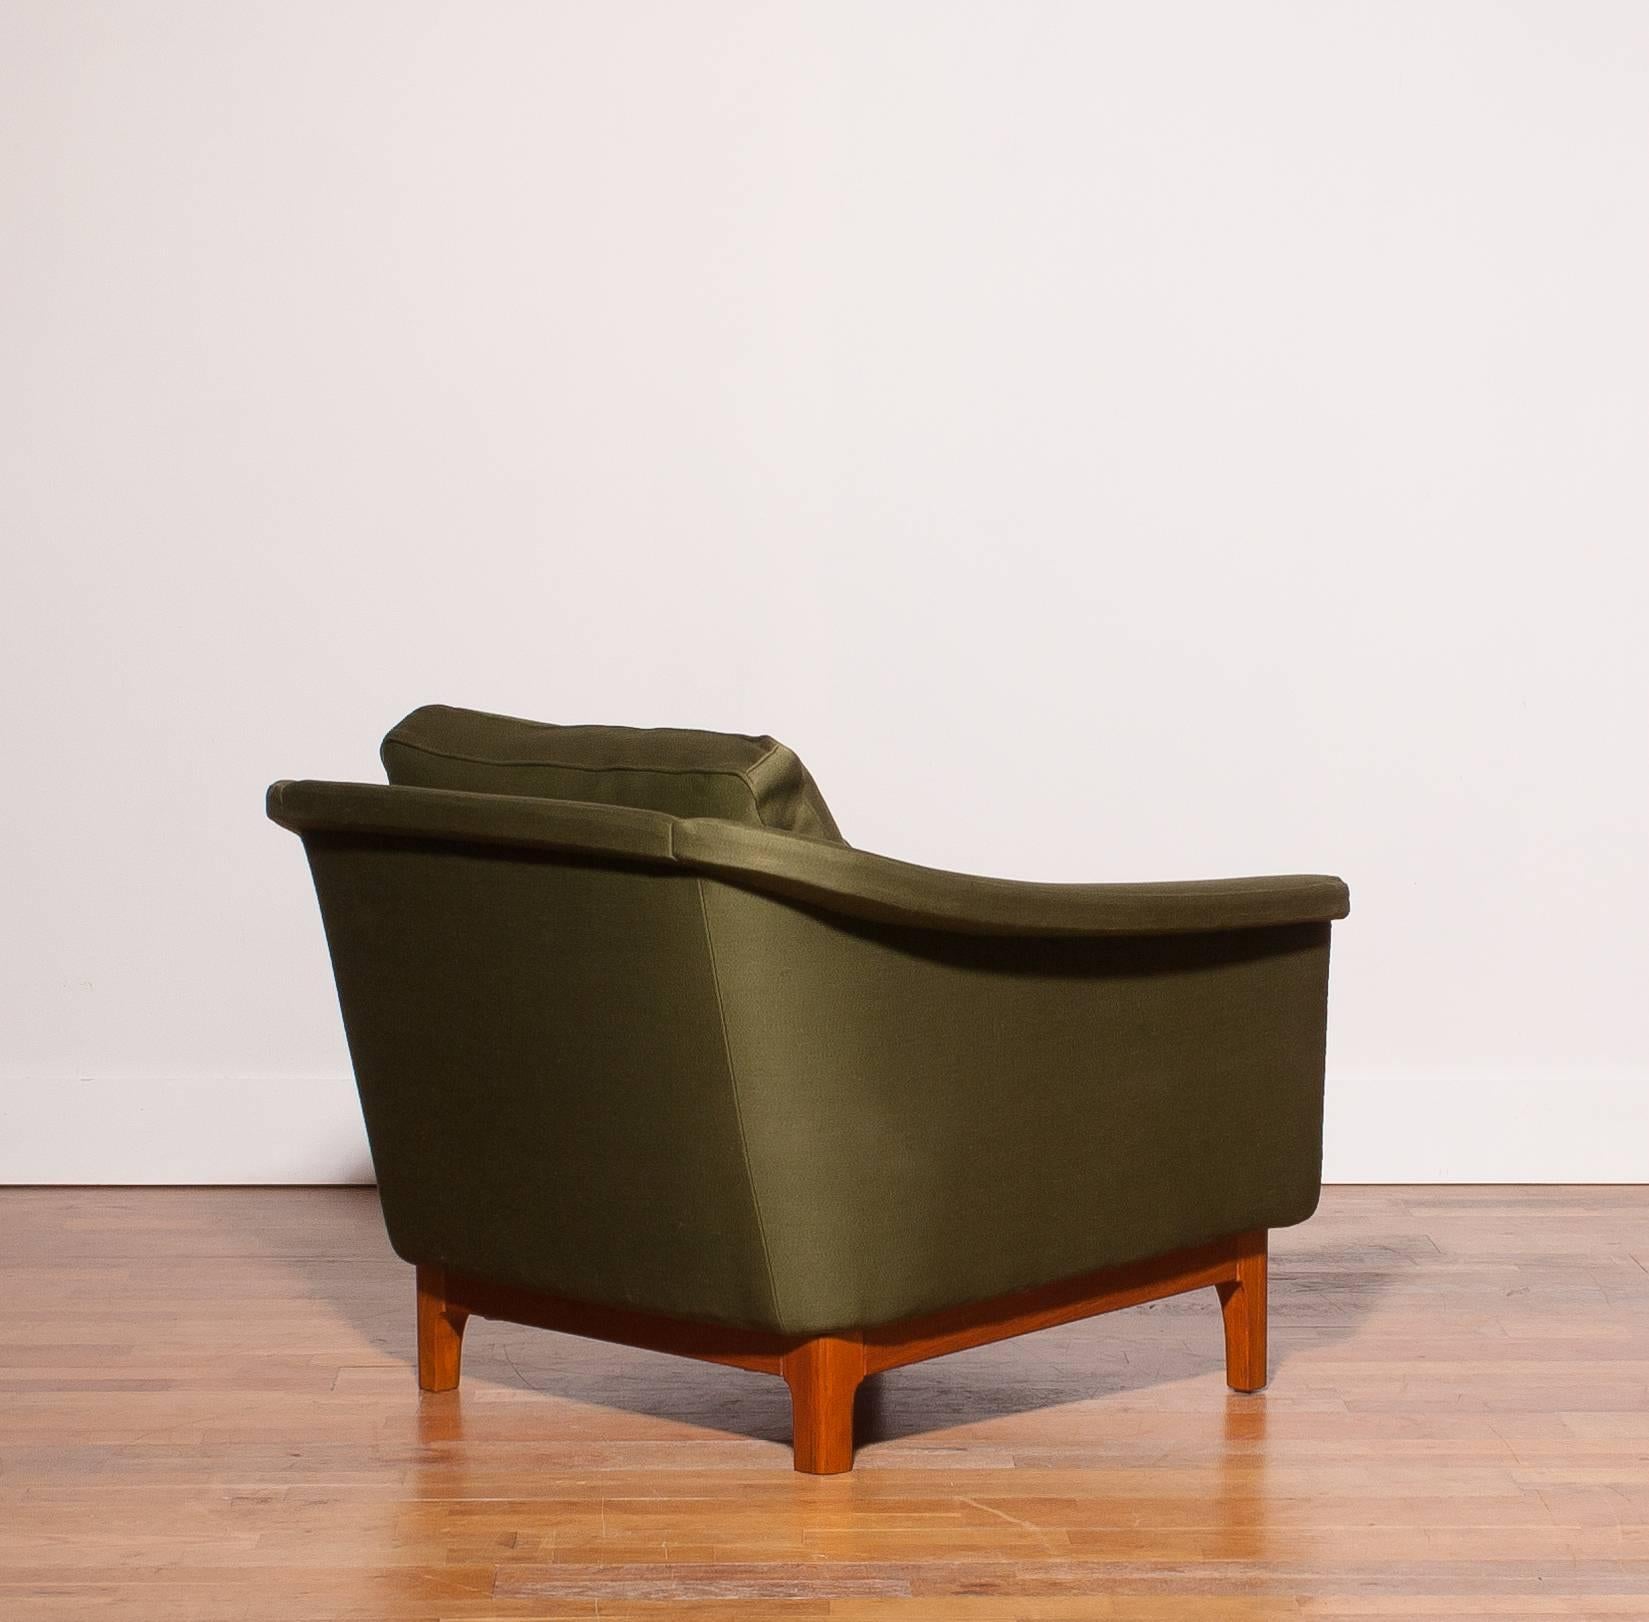 1960s, Green Lounge Chair by Folke Ohlsson for DUX. 2